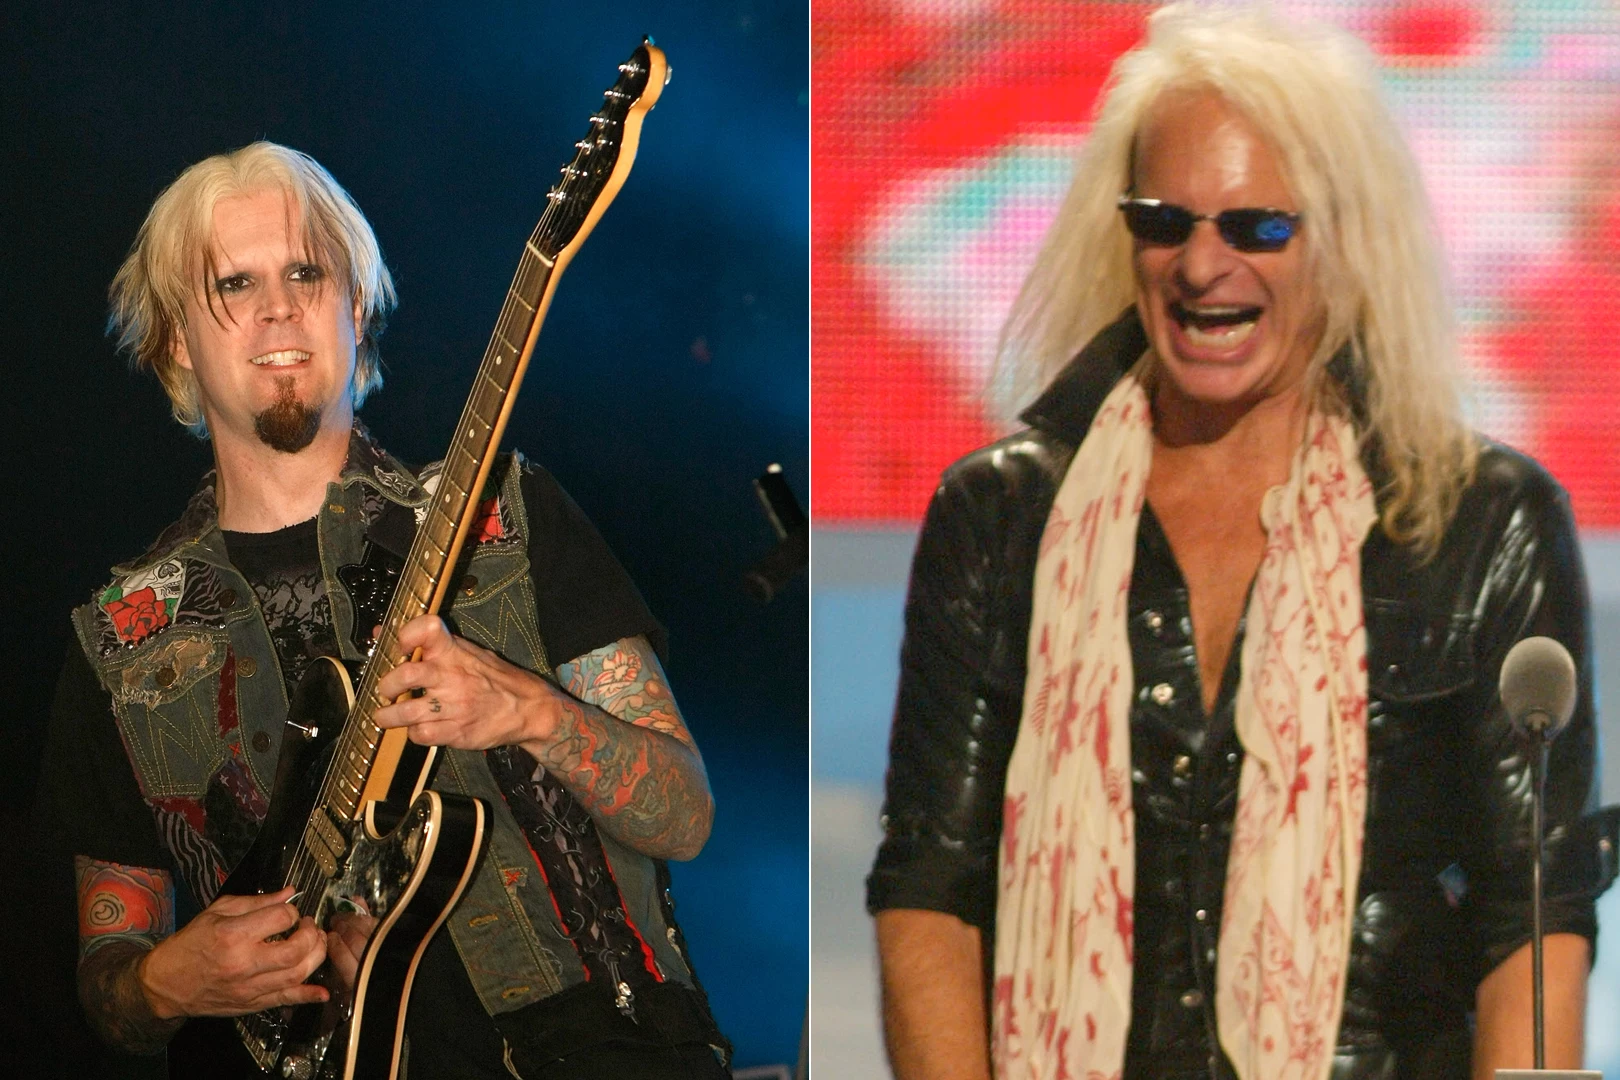 How John 5 Landed His Guitarist Gig With David Lee Roth